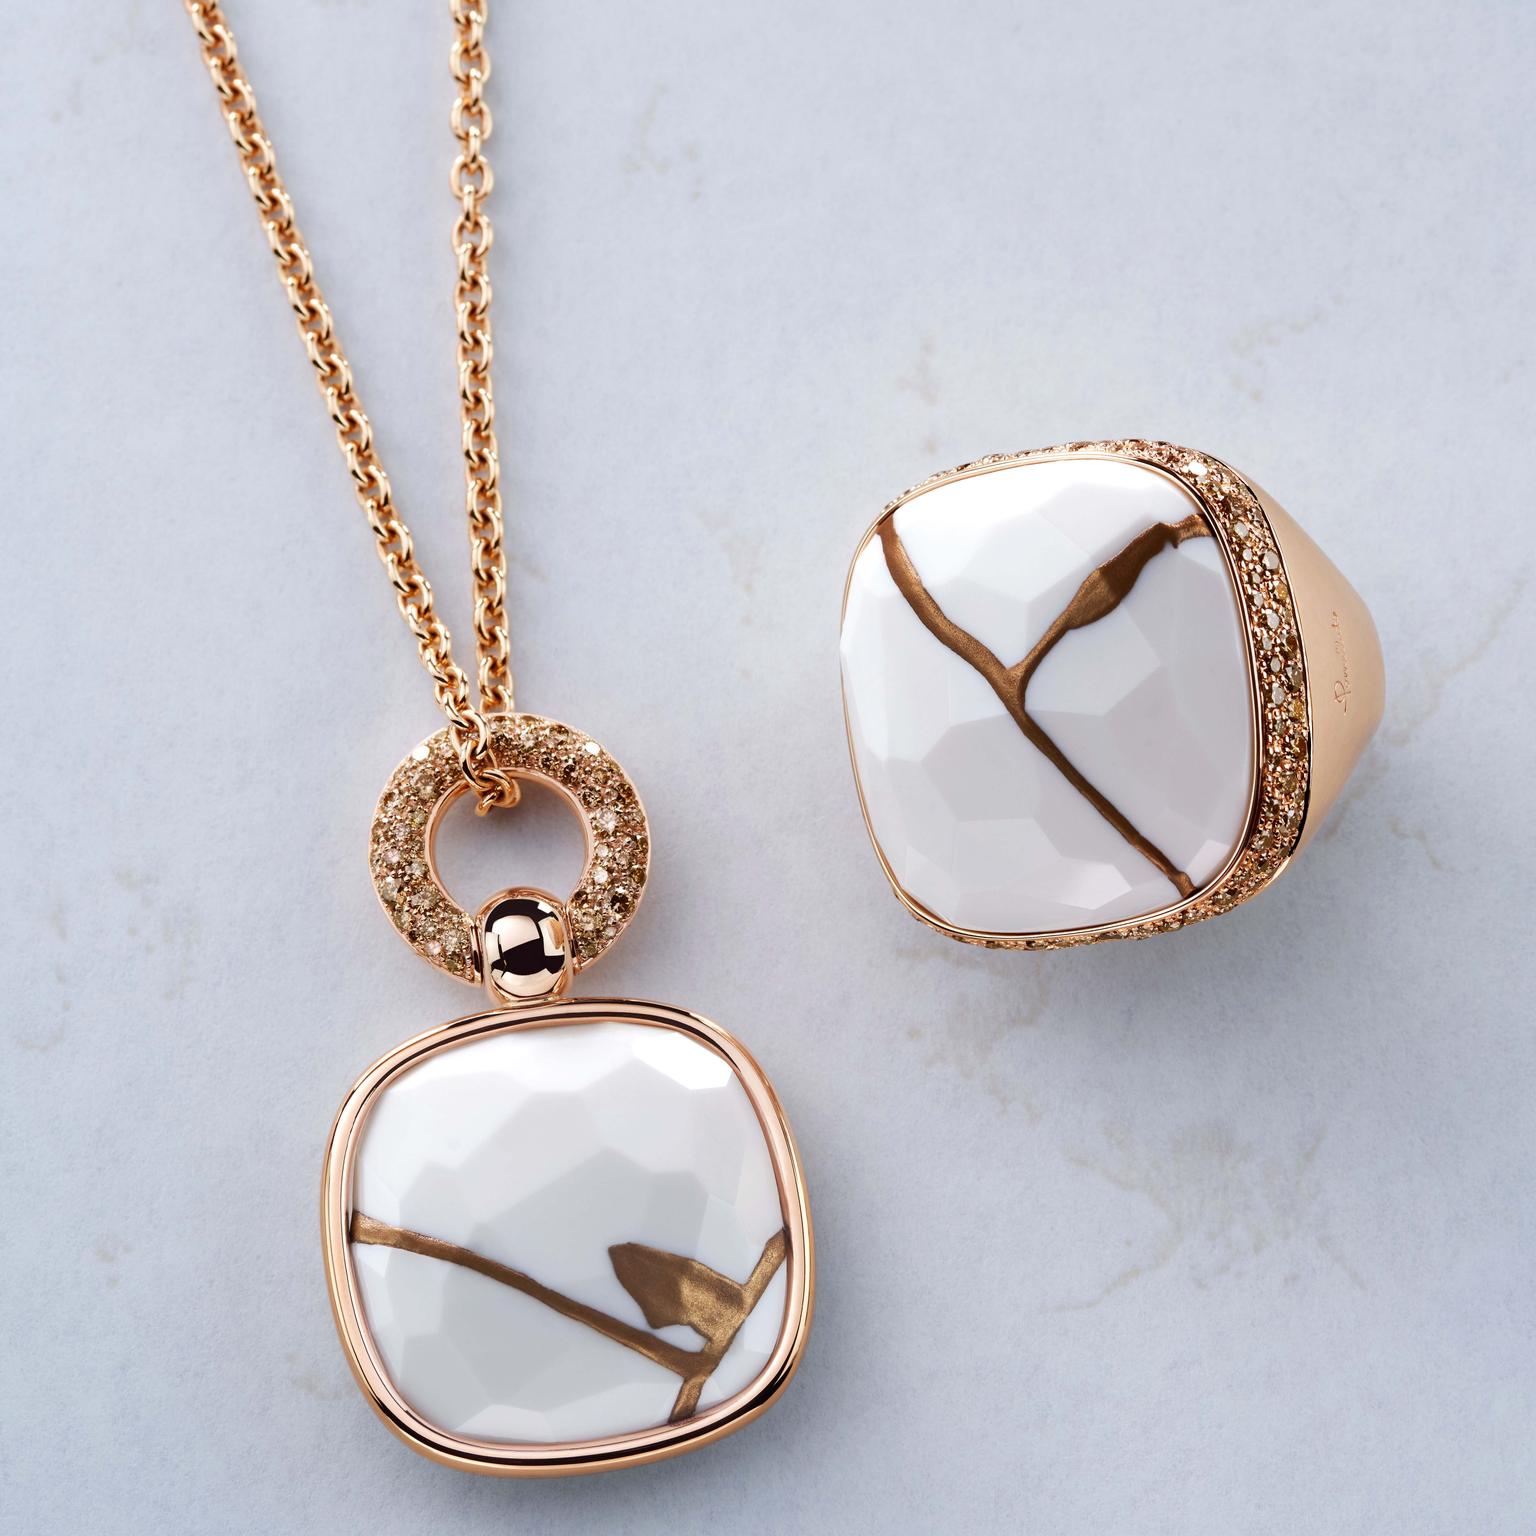 Pomellato Kintsugi Collection_ring and pendant in rose gold with kogolon and brown diamonds